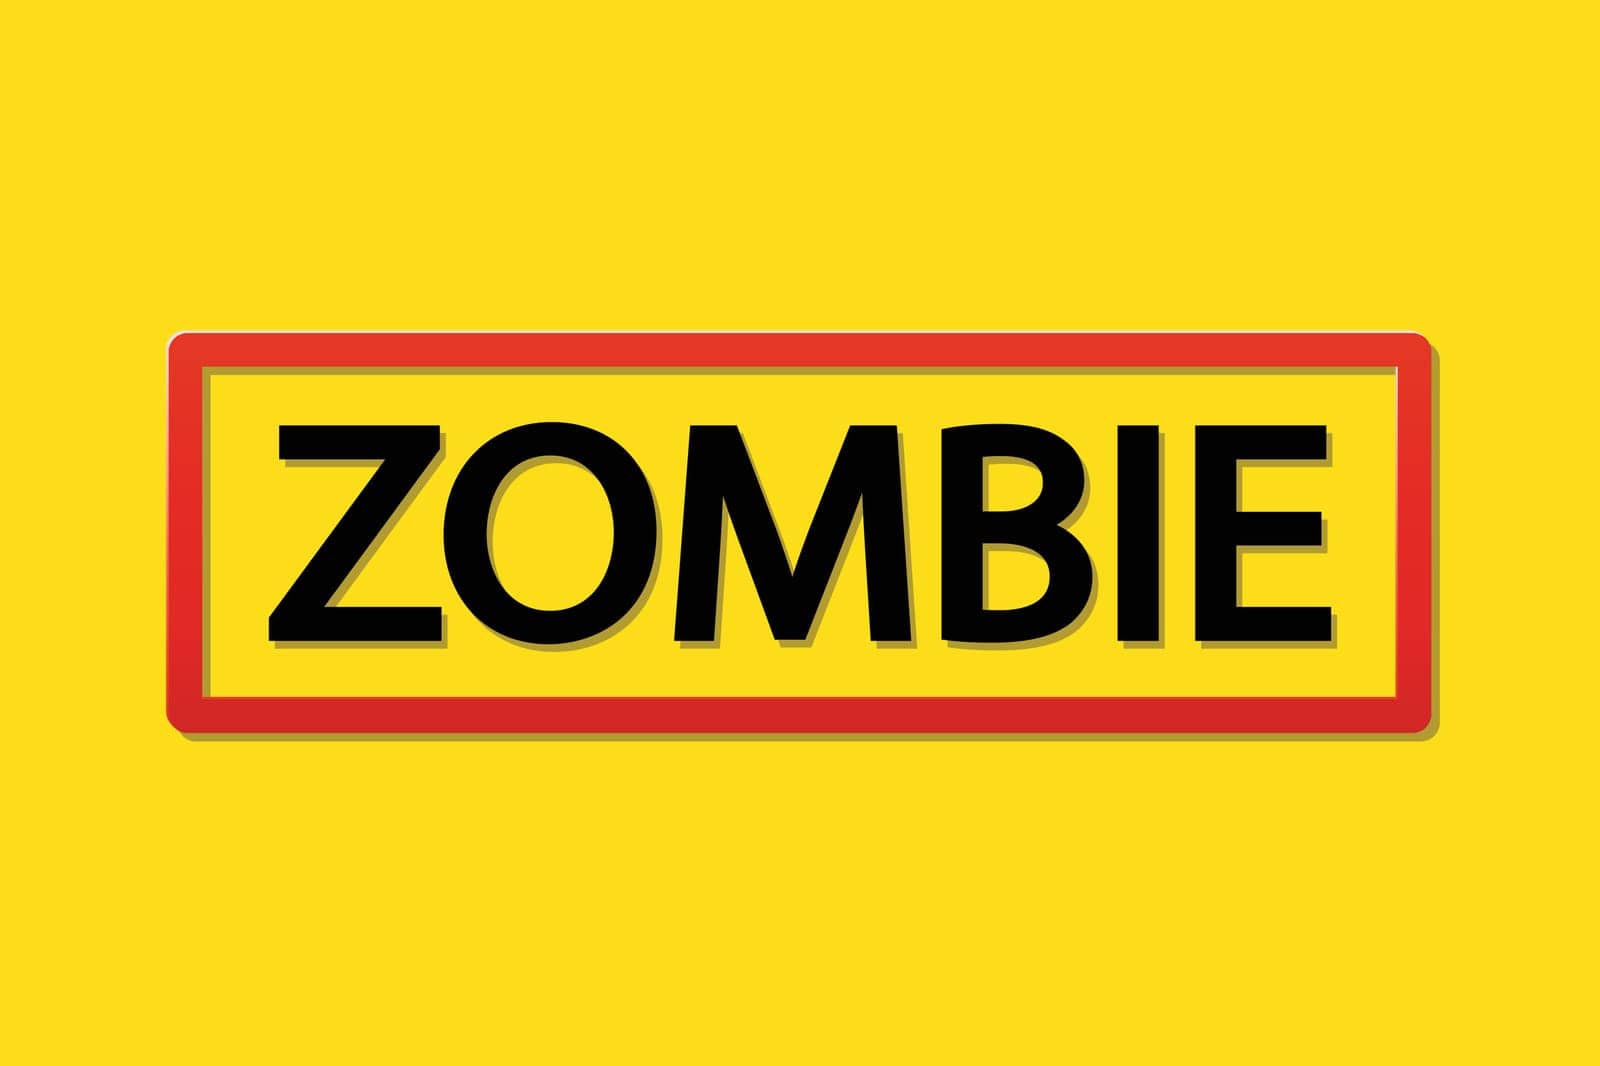 illustration of word zombie on yellow background with red frame